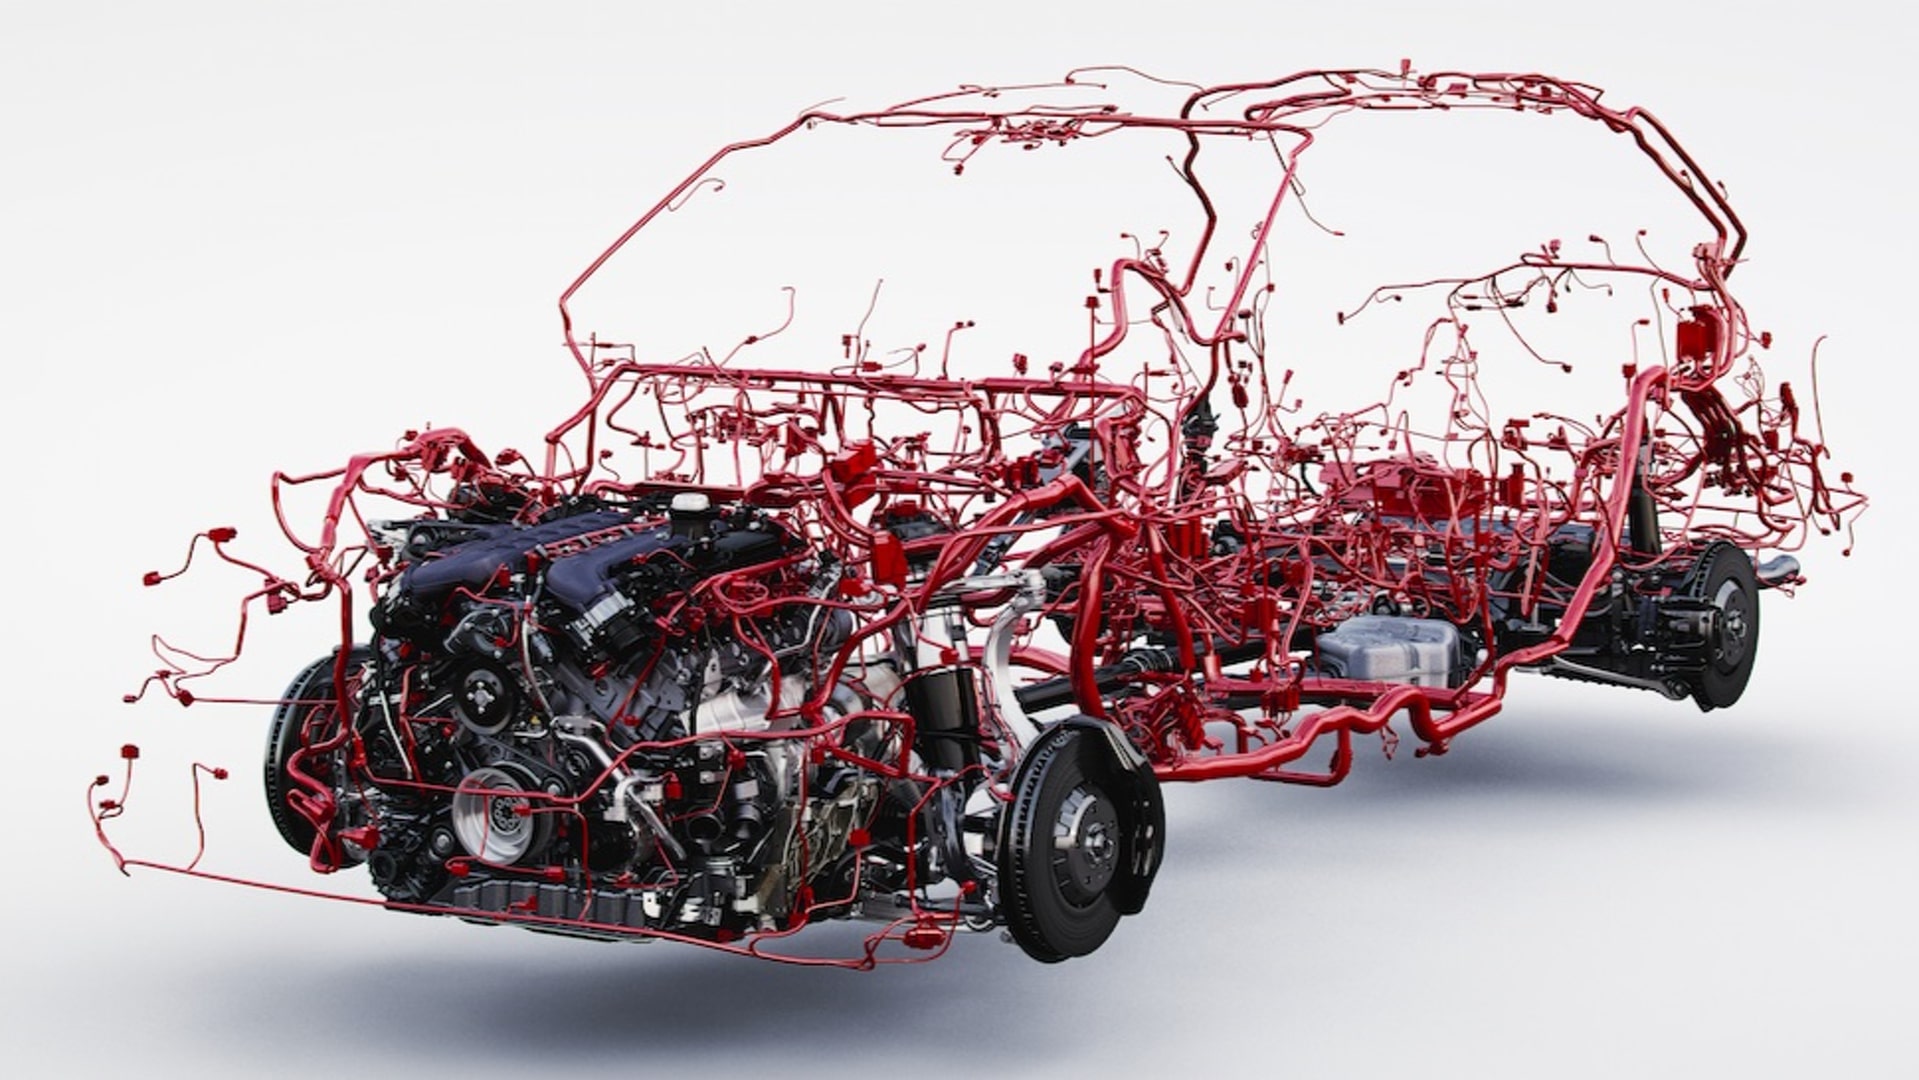 When Does a Car Need Complete Rewiring, and How Much Does Rewiring Cost?